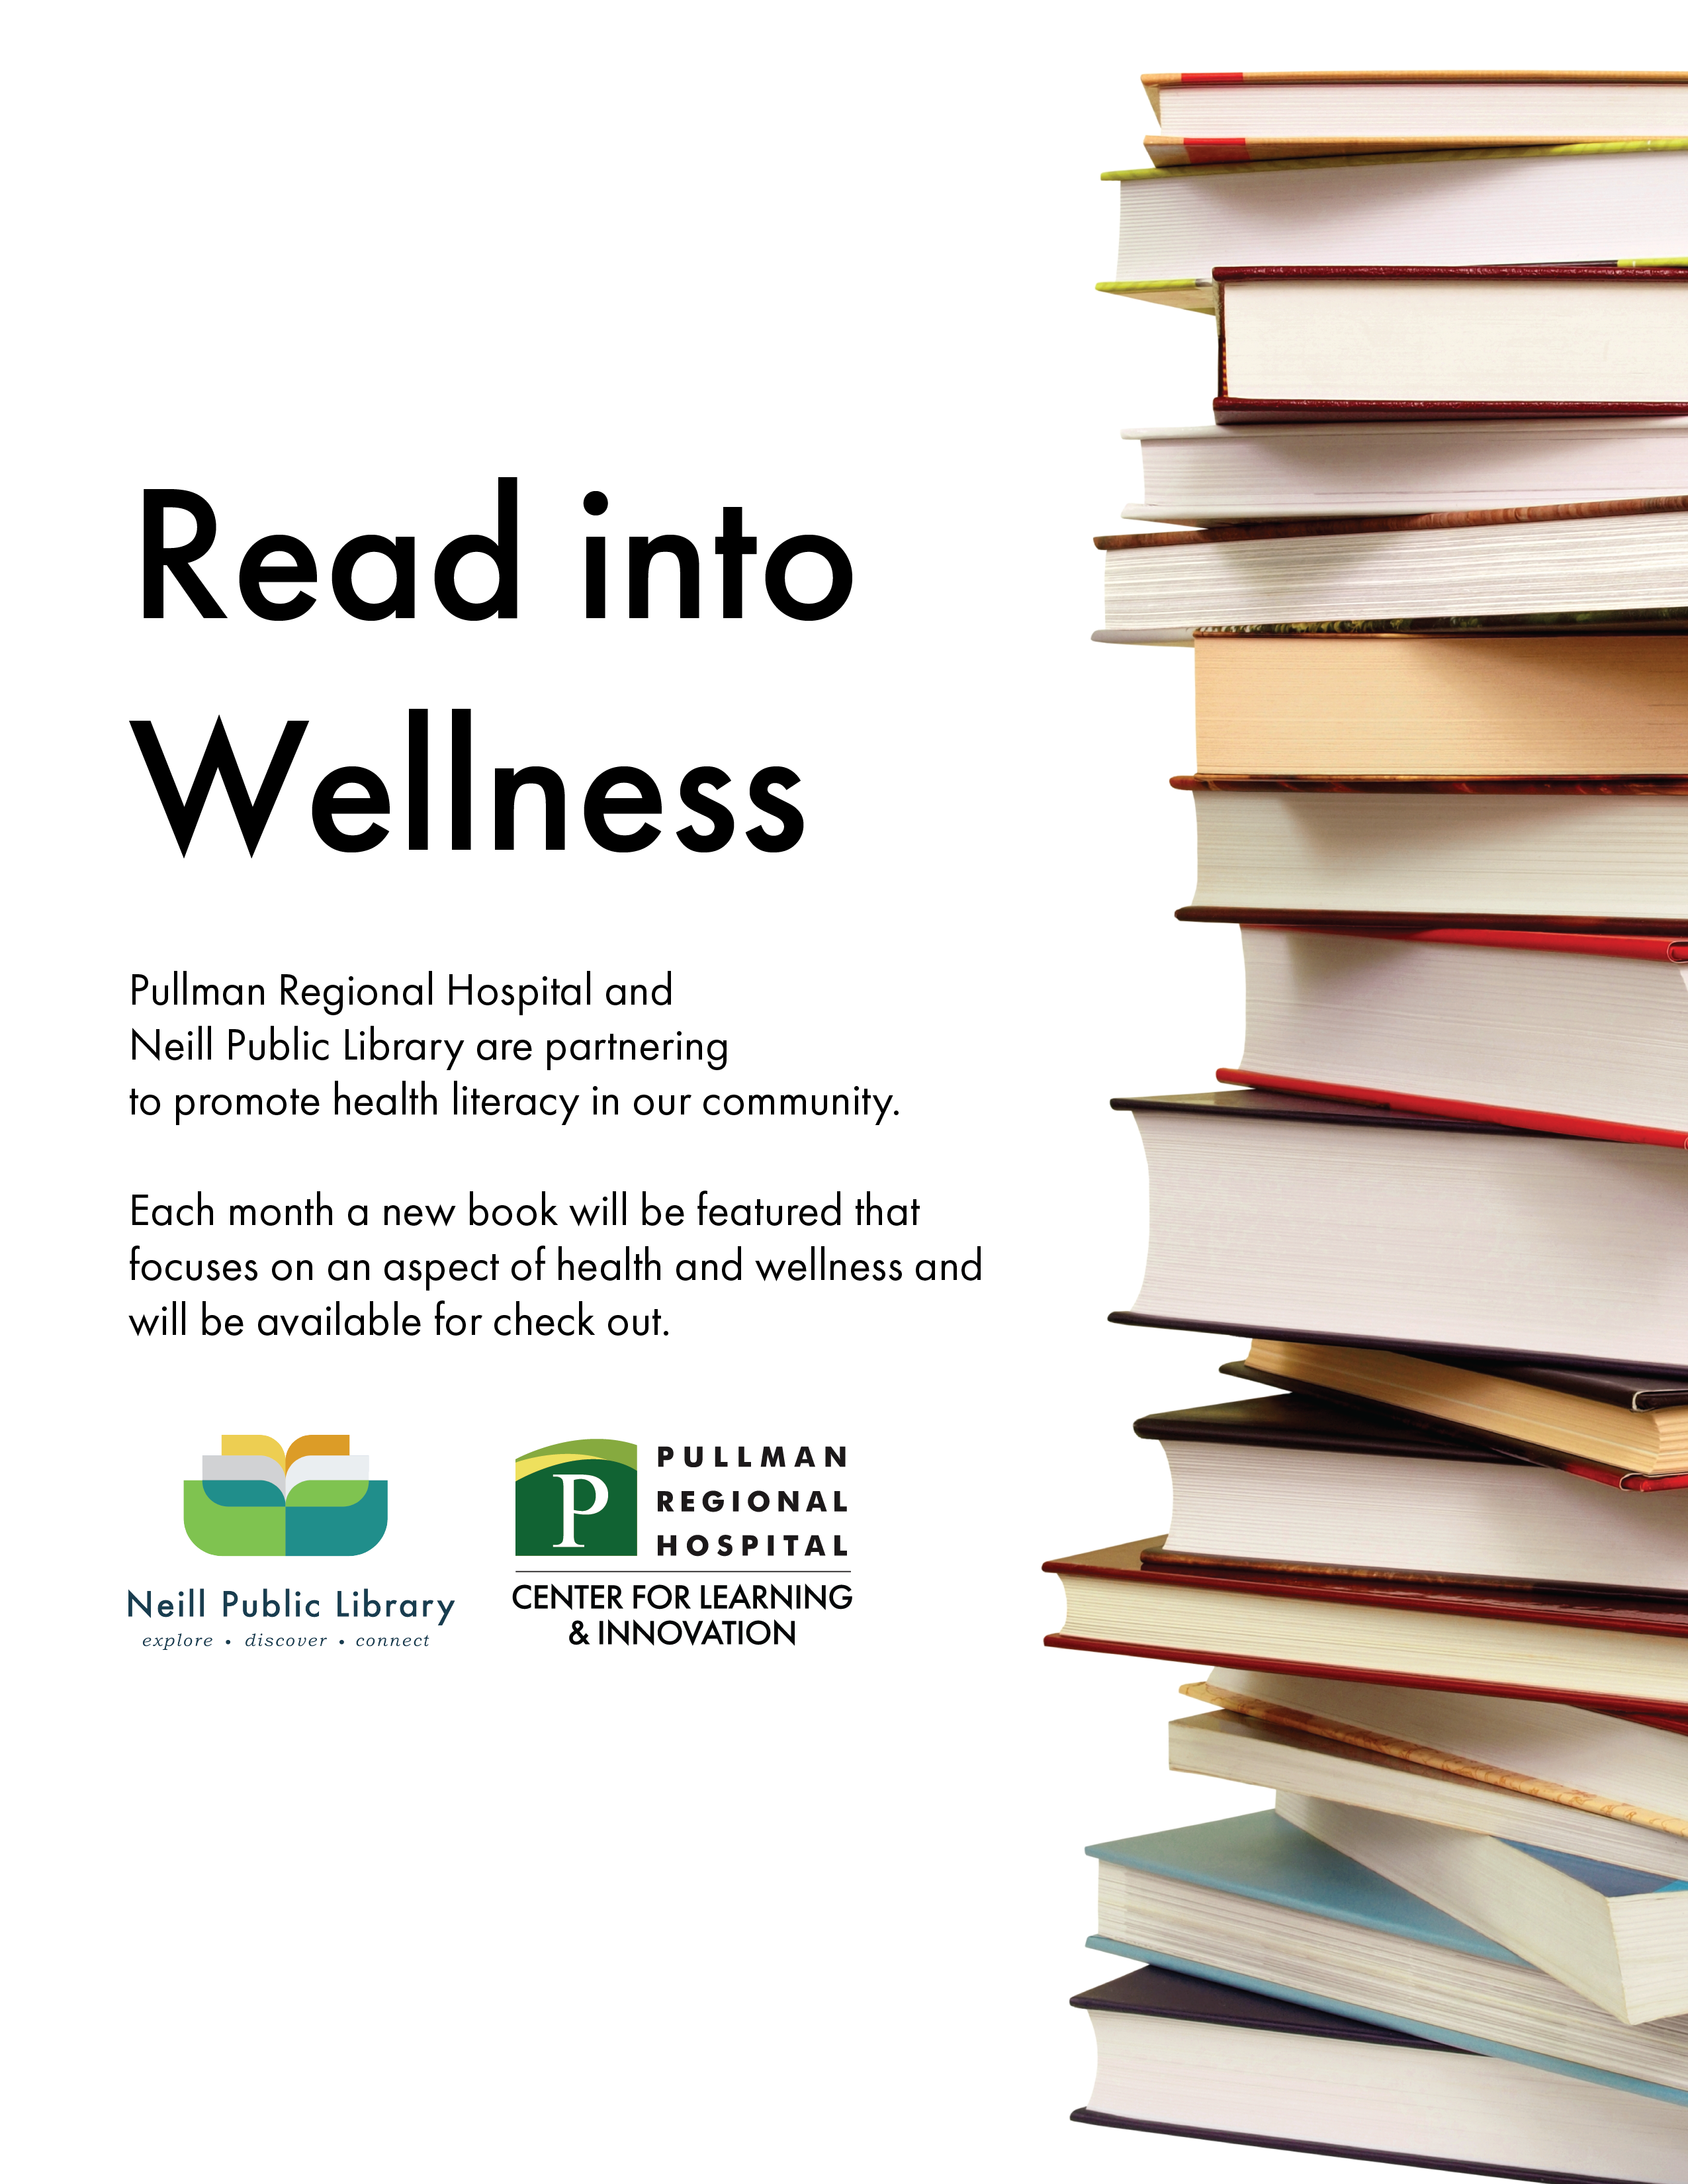 Pullman Regional Hospital Partners with Neill Public Library for Health Literacy